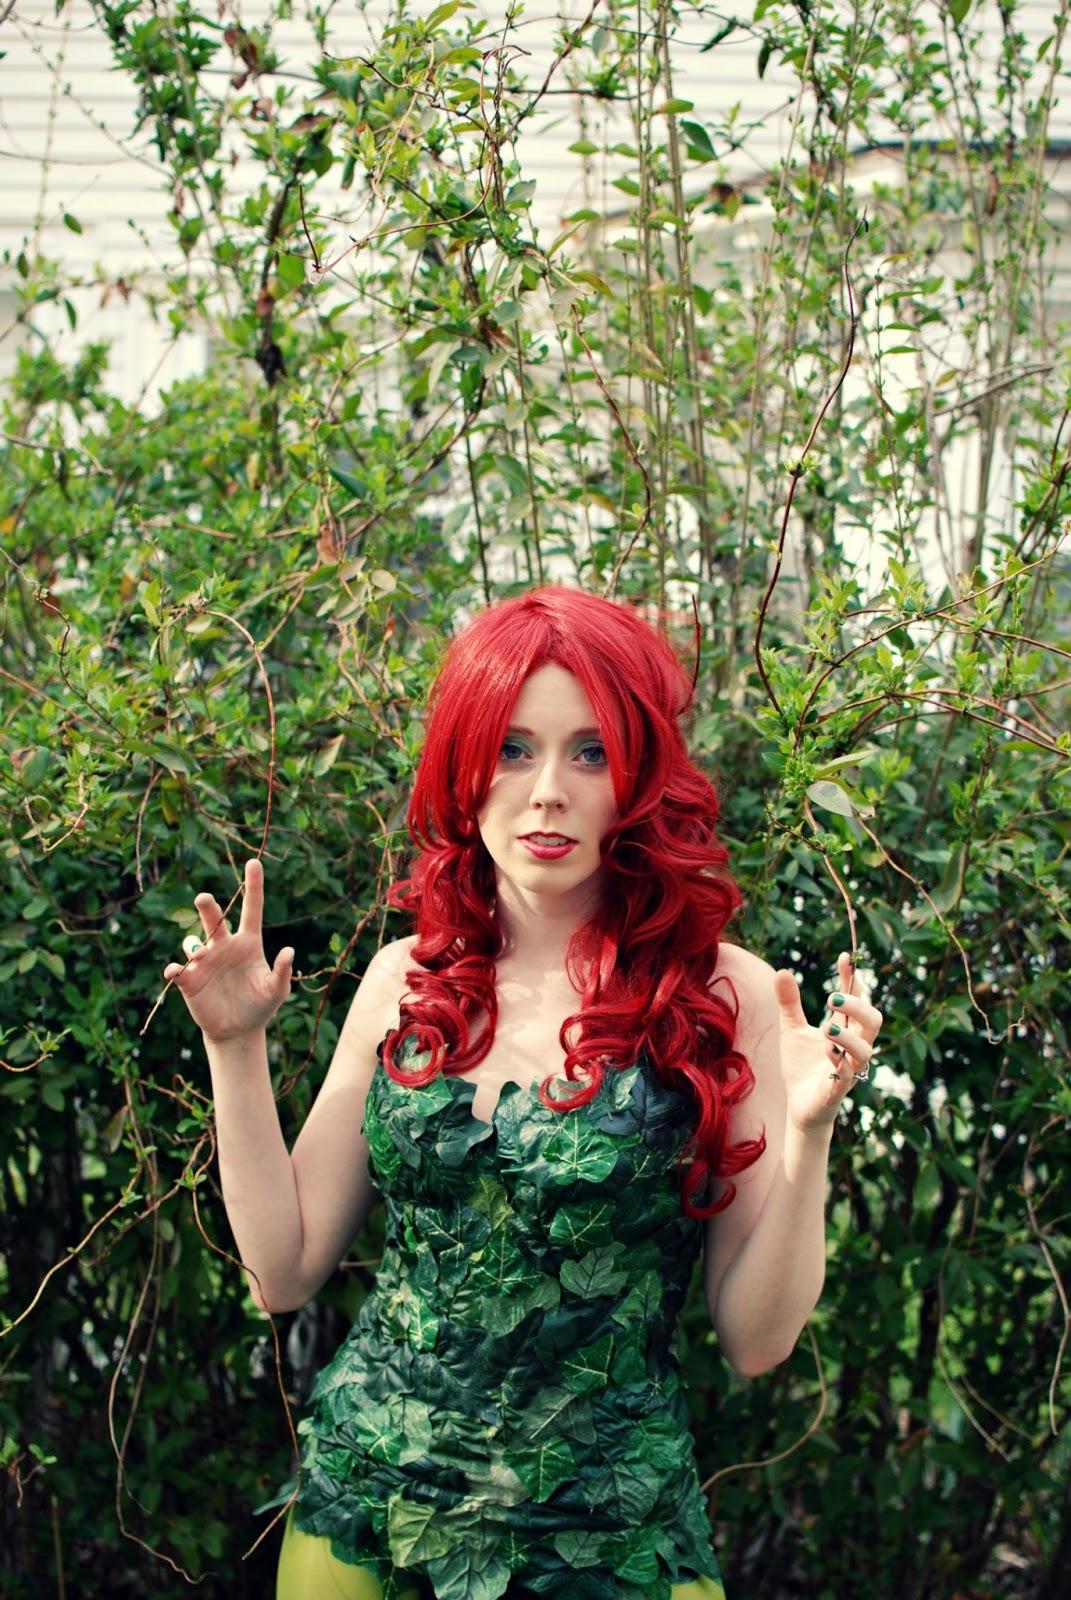 50+ Hot Pictures Of Poison Ivy – One Of The Most Beautiful Batman’s Villain 5